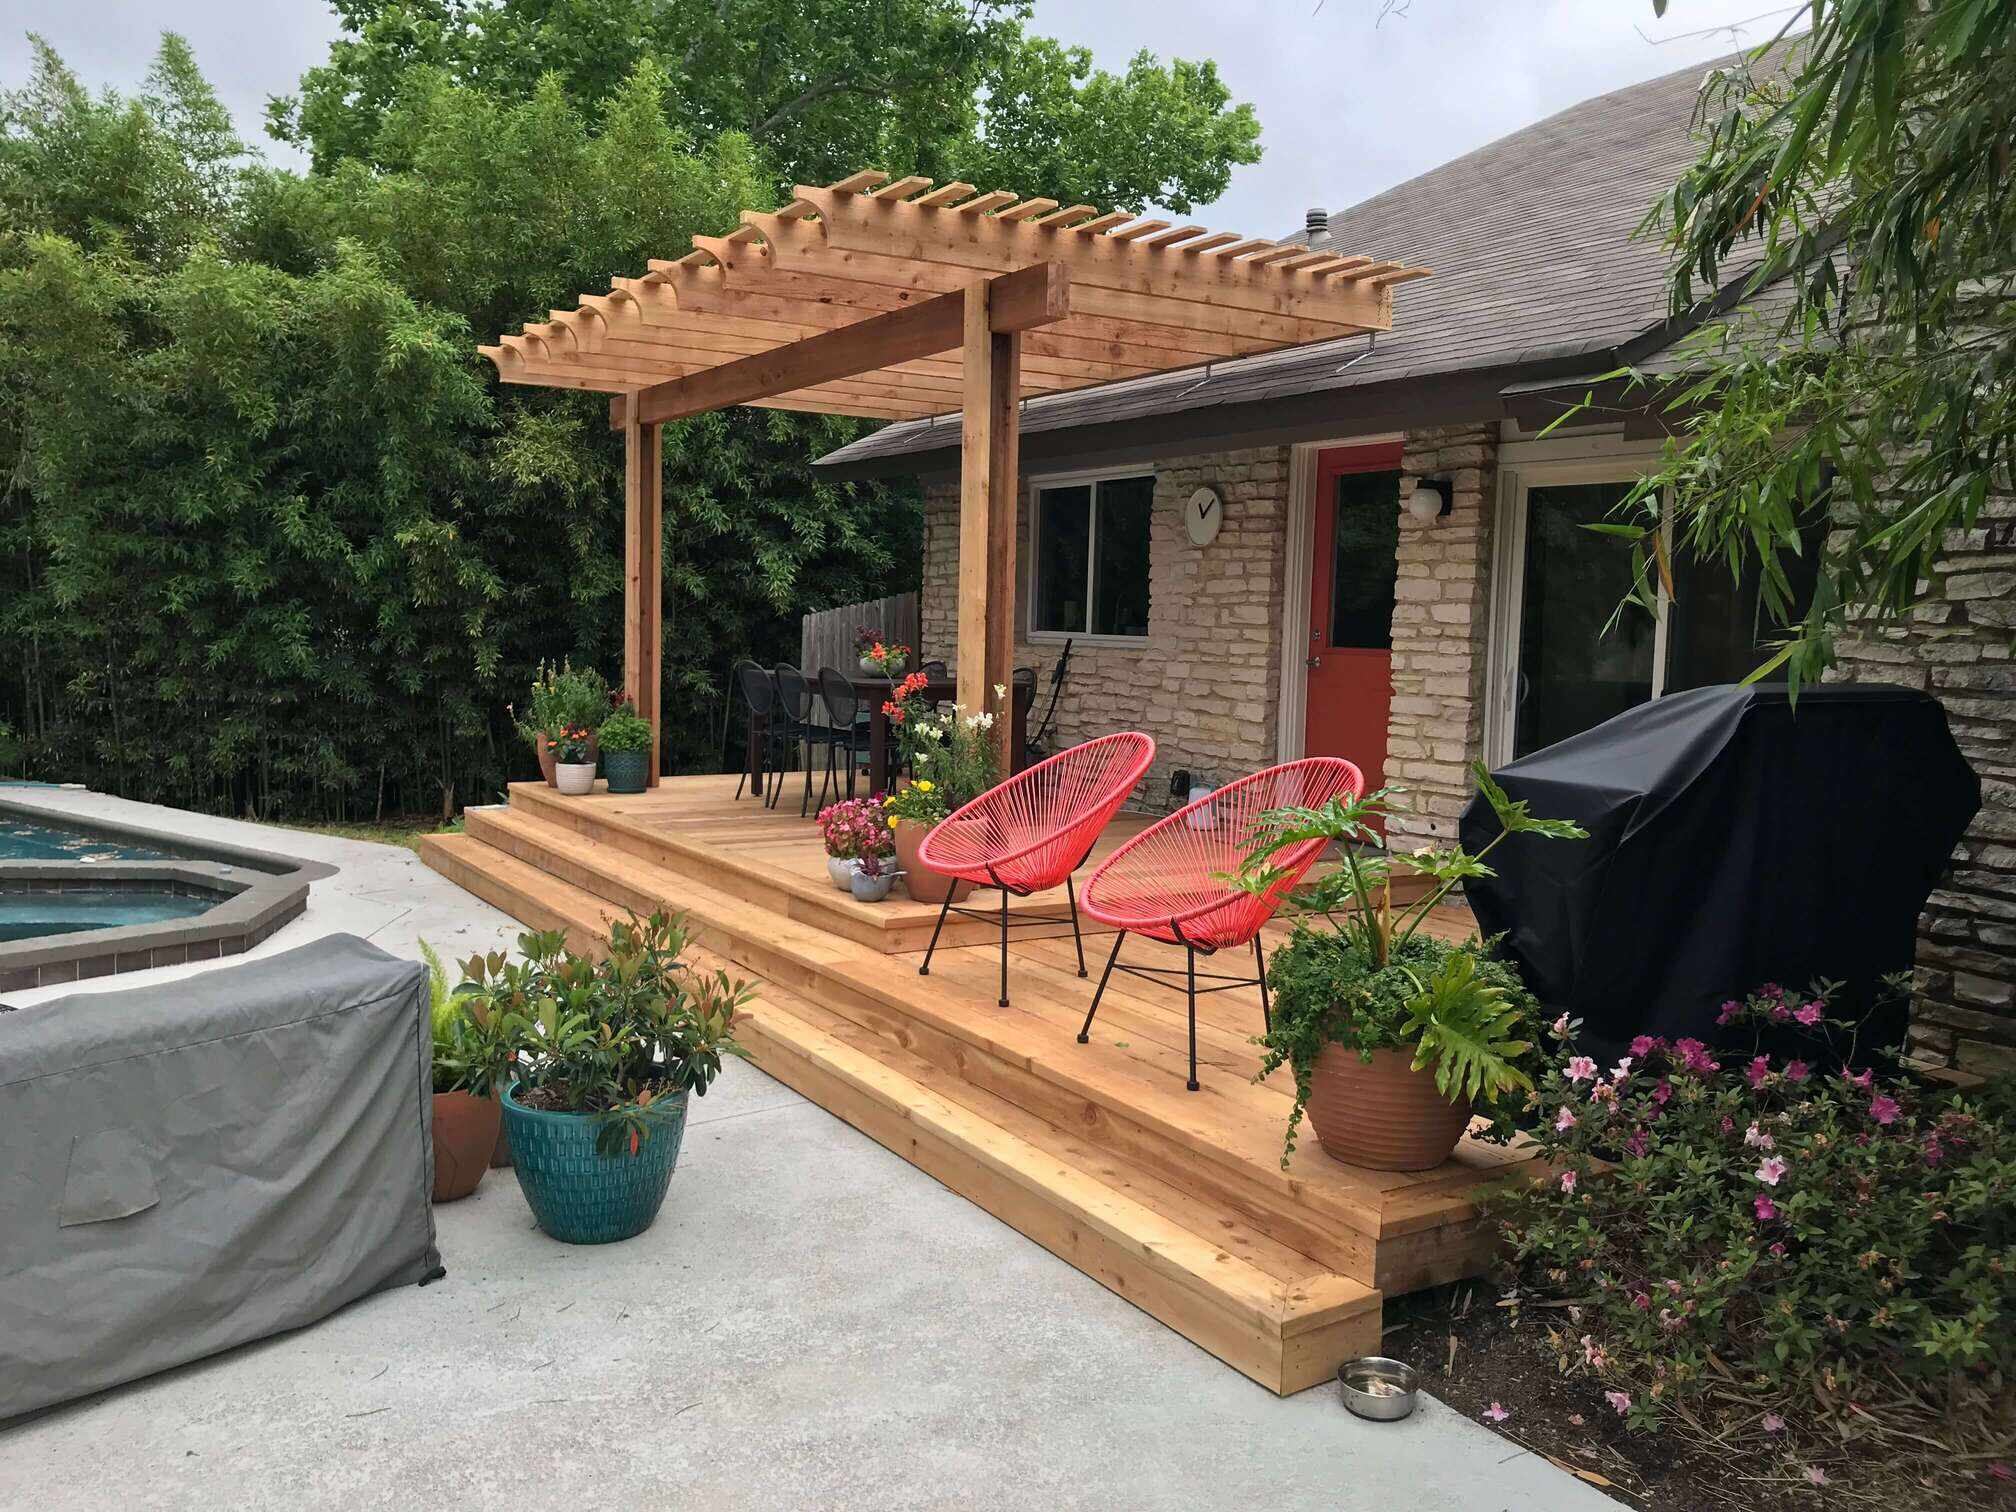 Deck with pergola and subtle landscaping